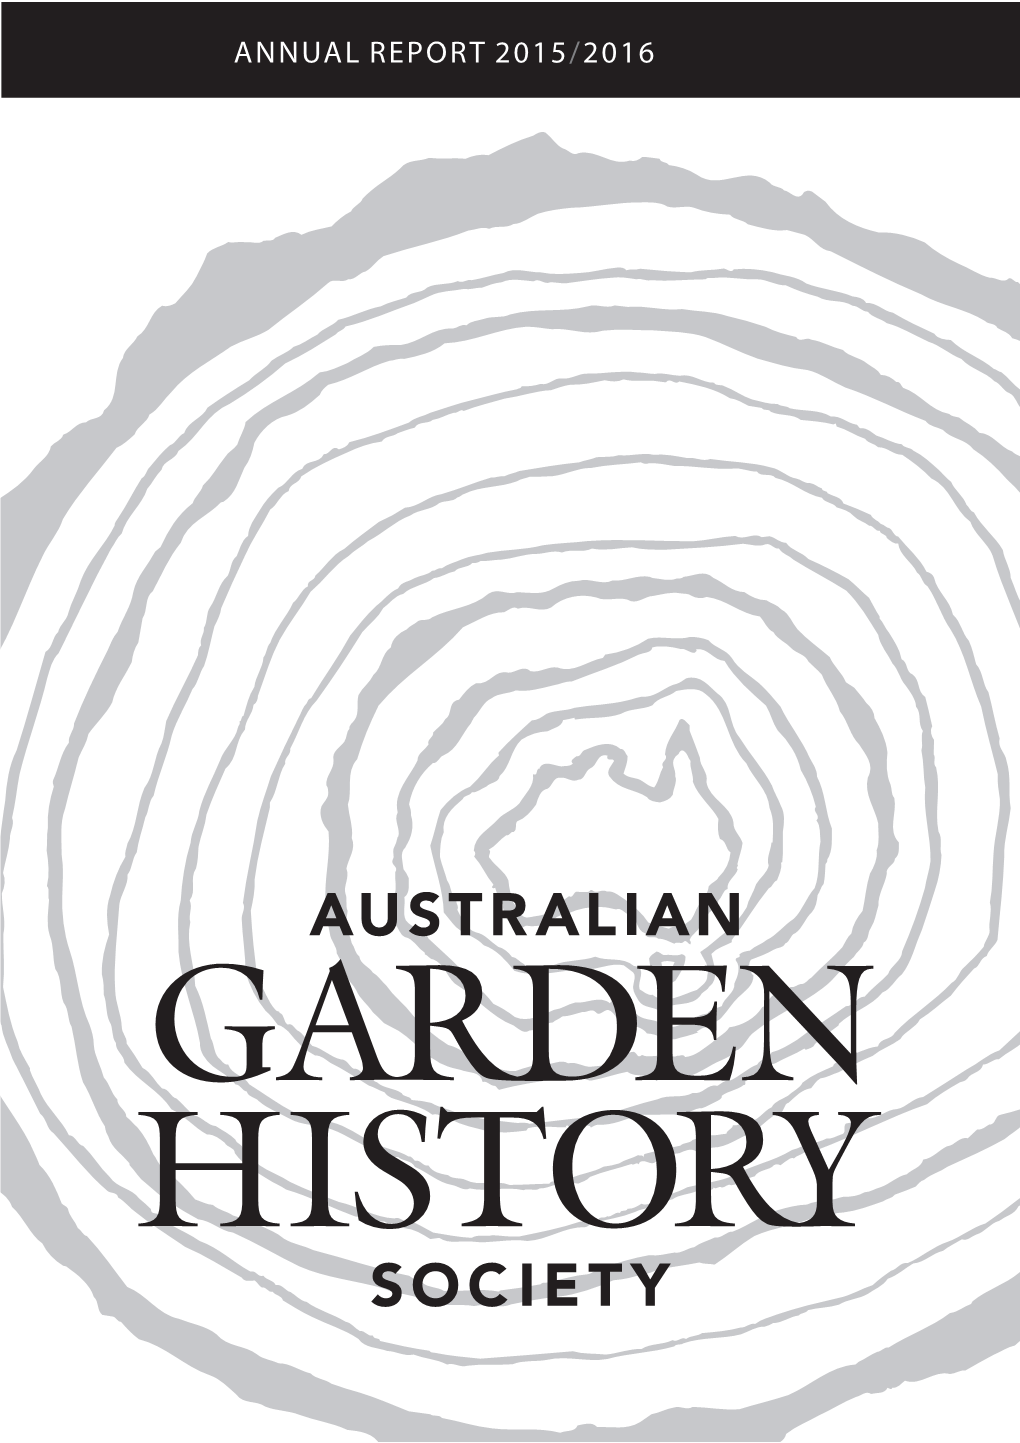 ANNUAL REPORT 2015/2016 Annual Report of the Australian Garden History Society Inc